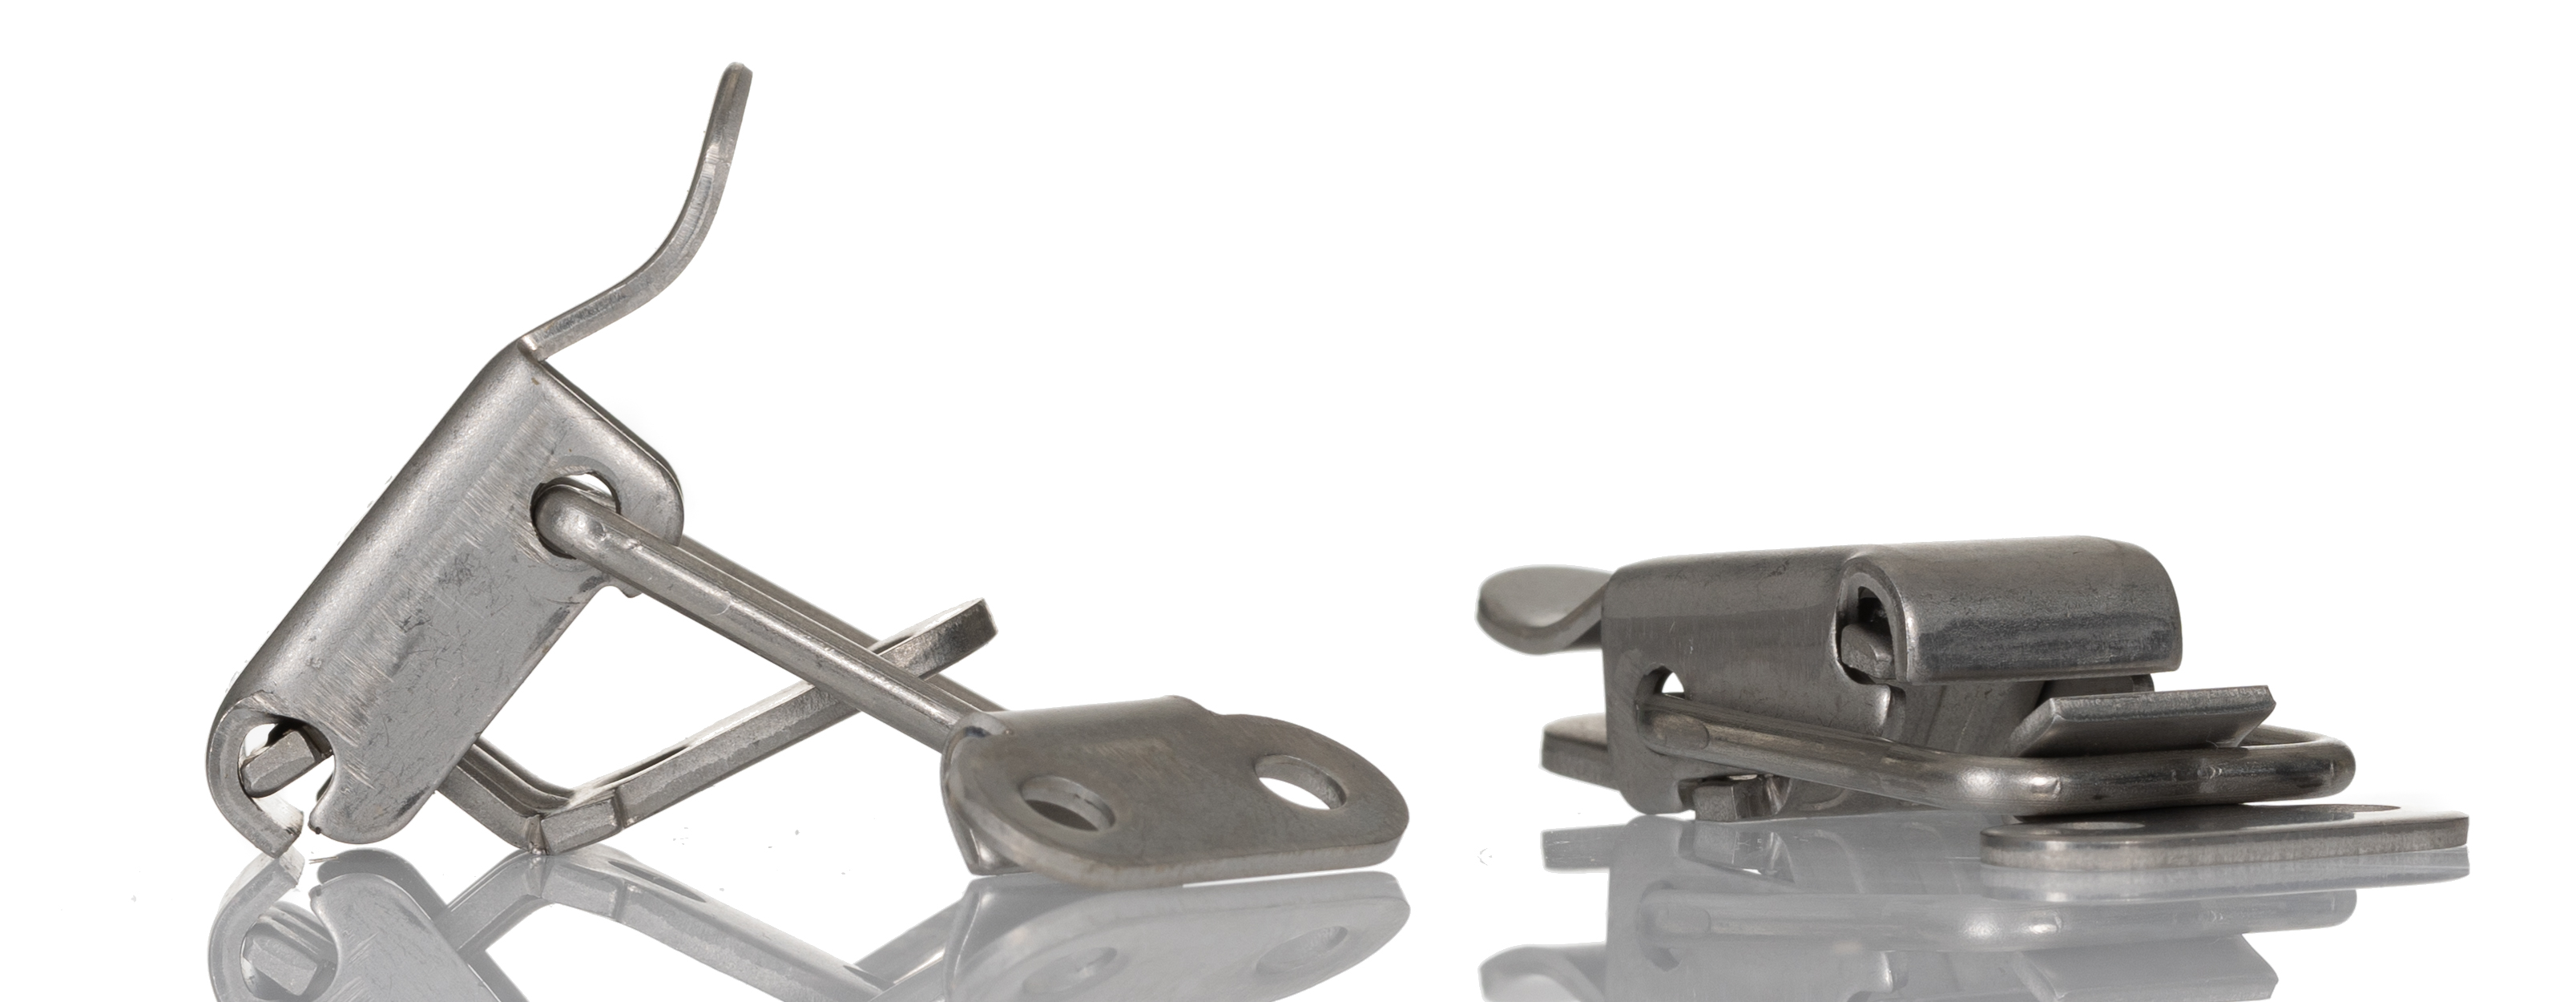 How to choose the right Toggle Latches for your application.